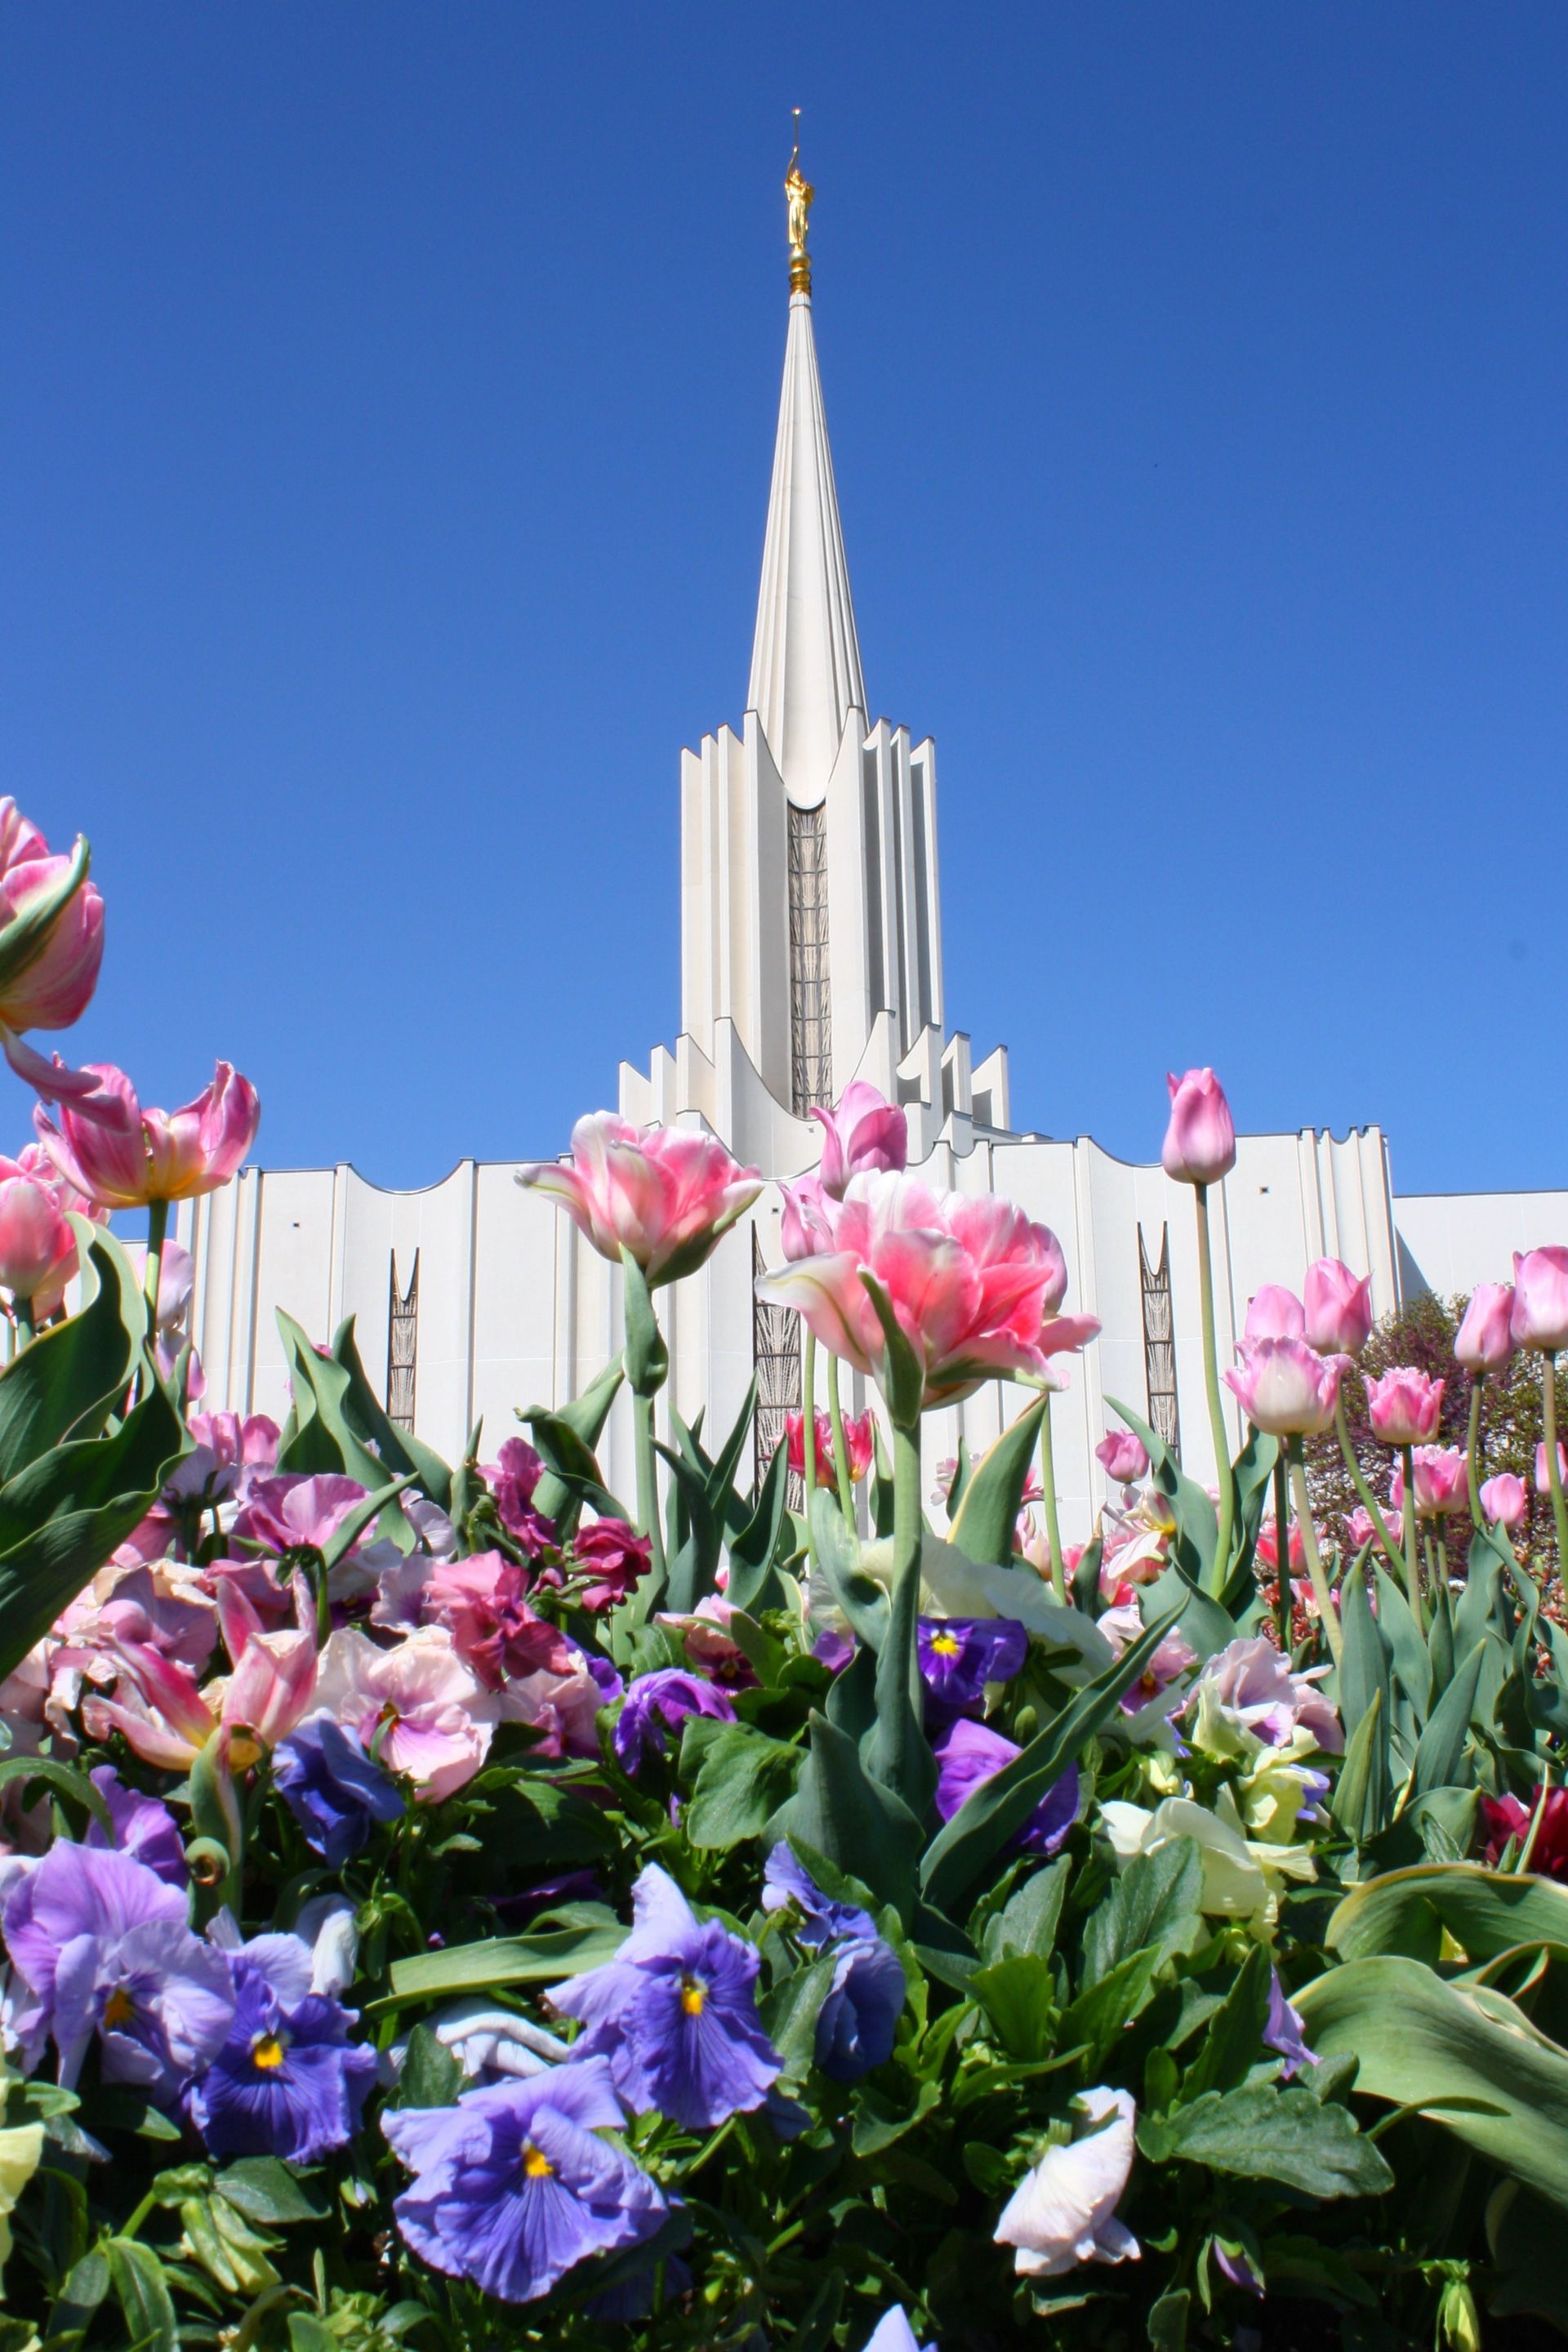 A view of the Jordan River Utah Temple from the grounds of the temple.